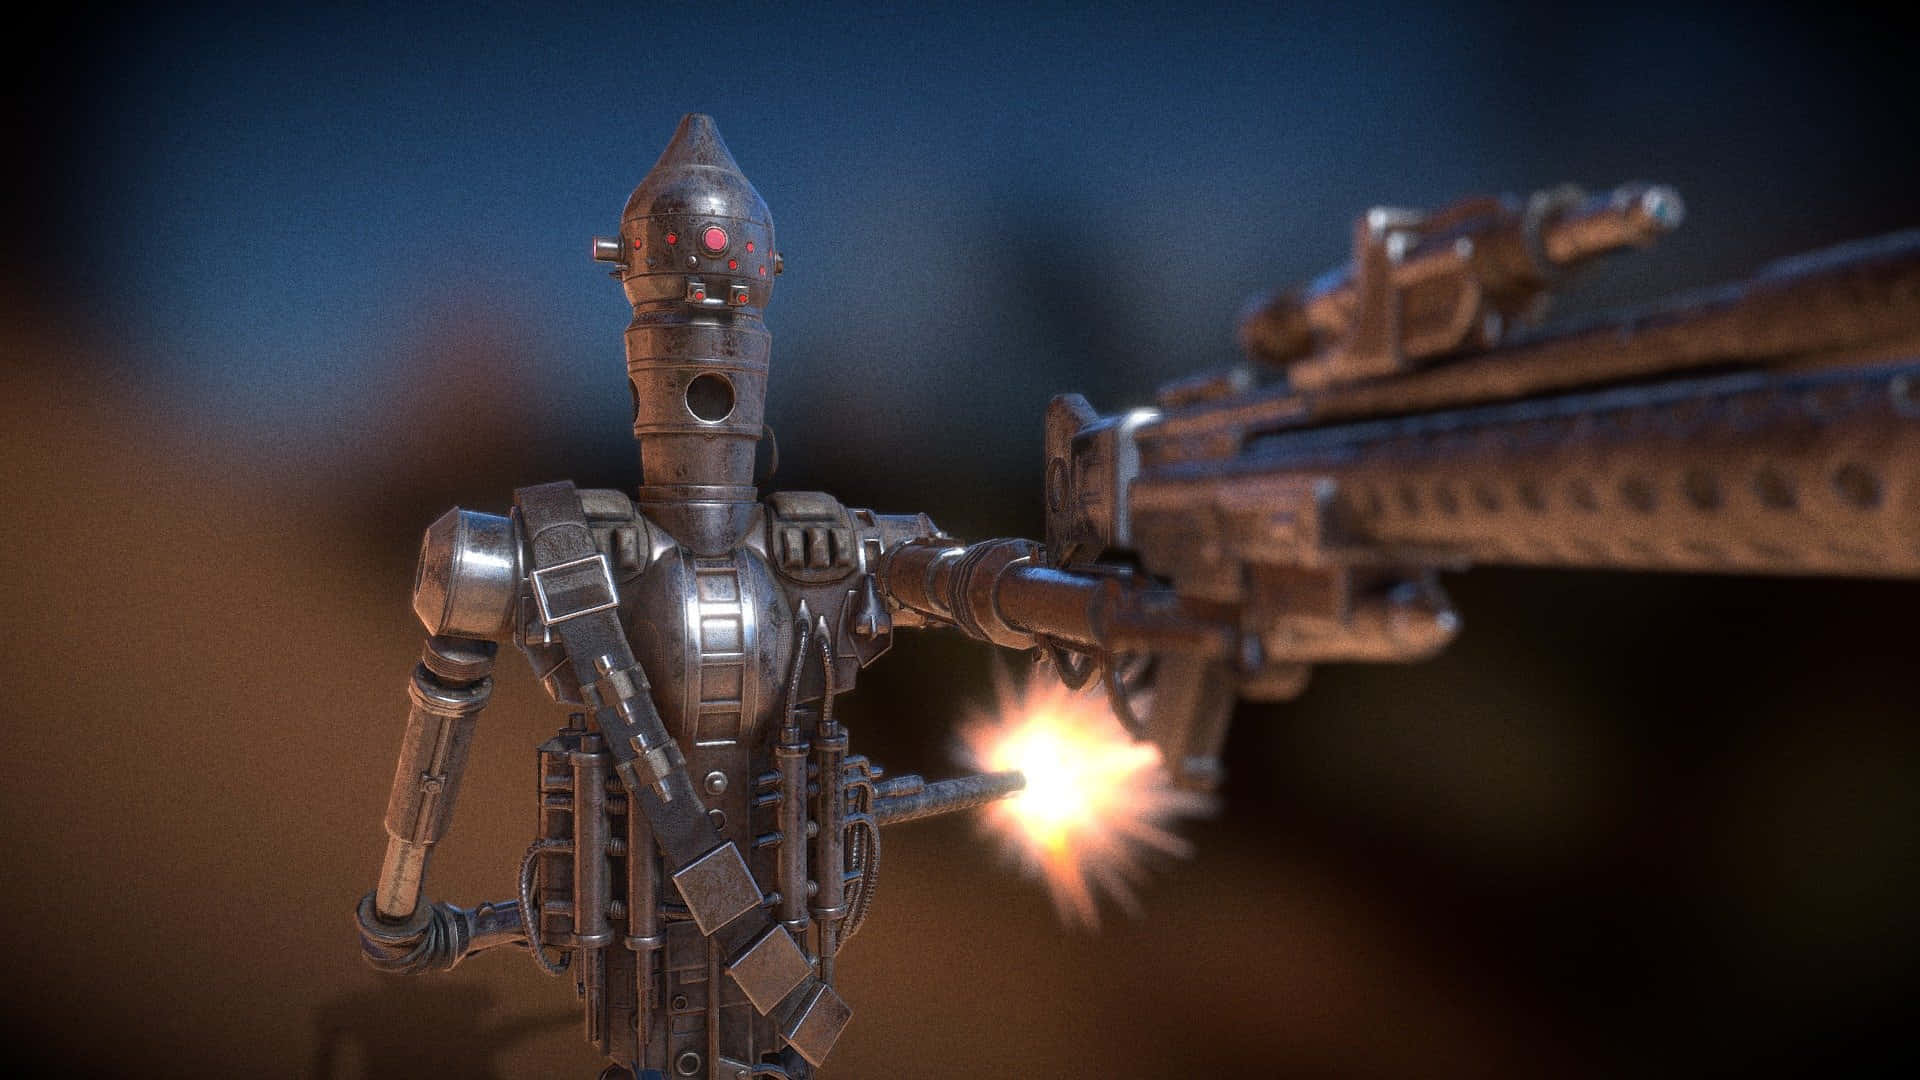 Enter the world of IG-88, the advanced droid assassin Wallpaper